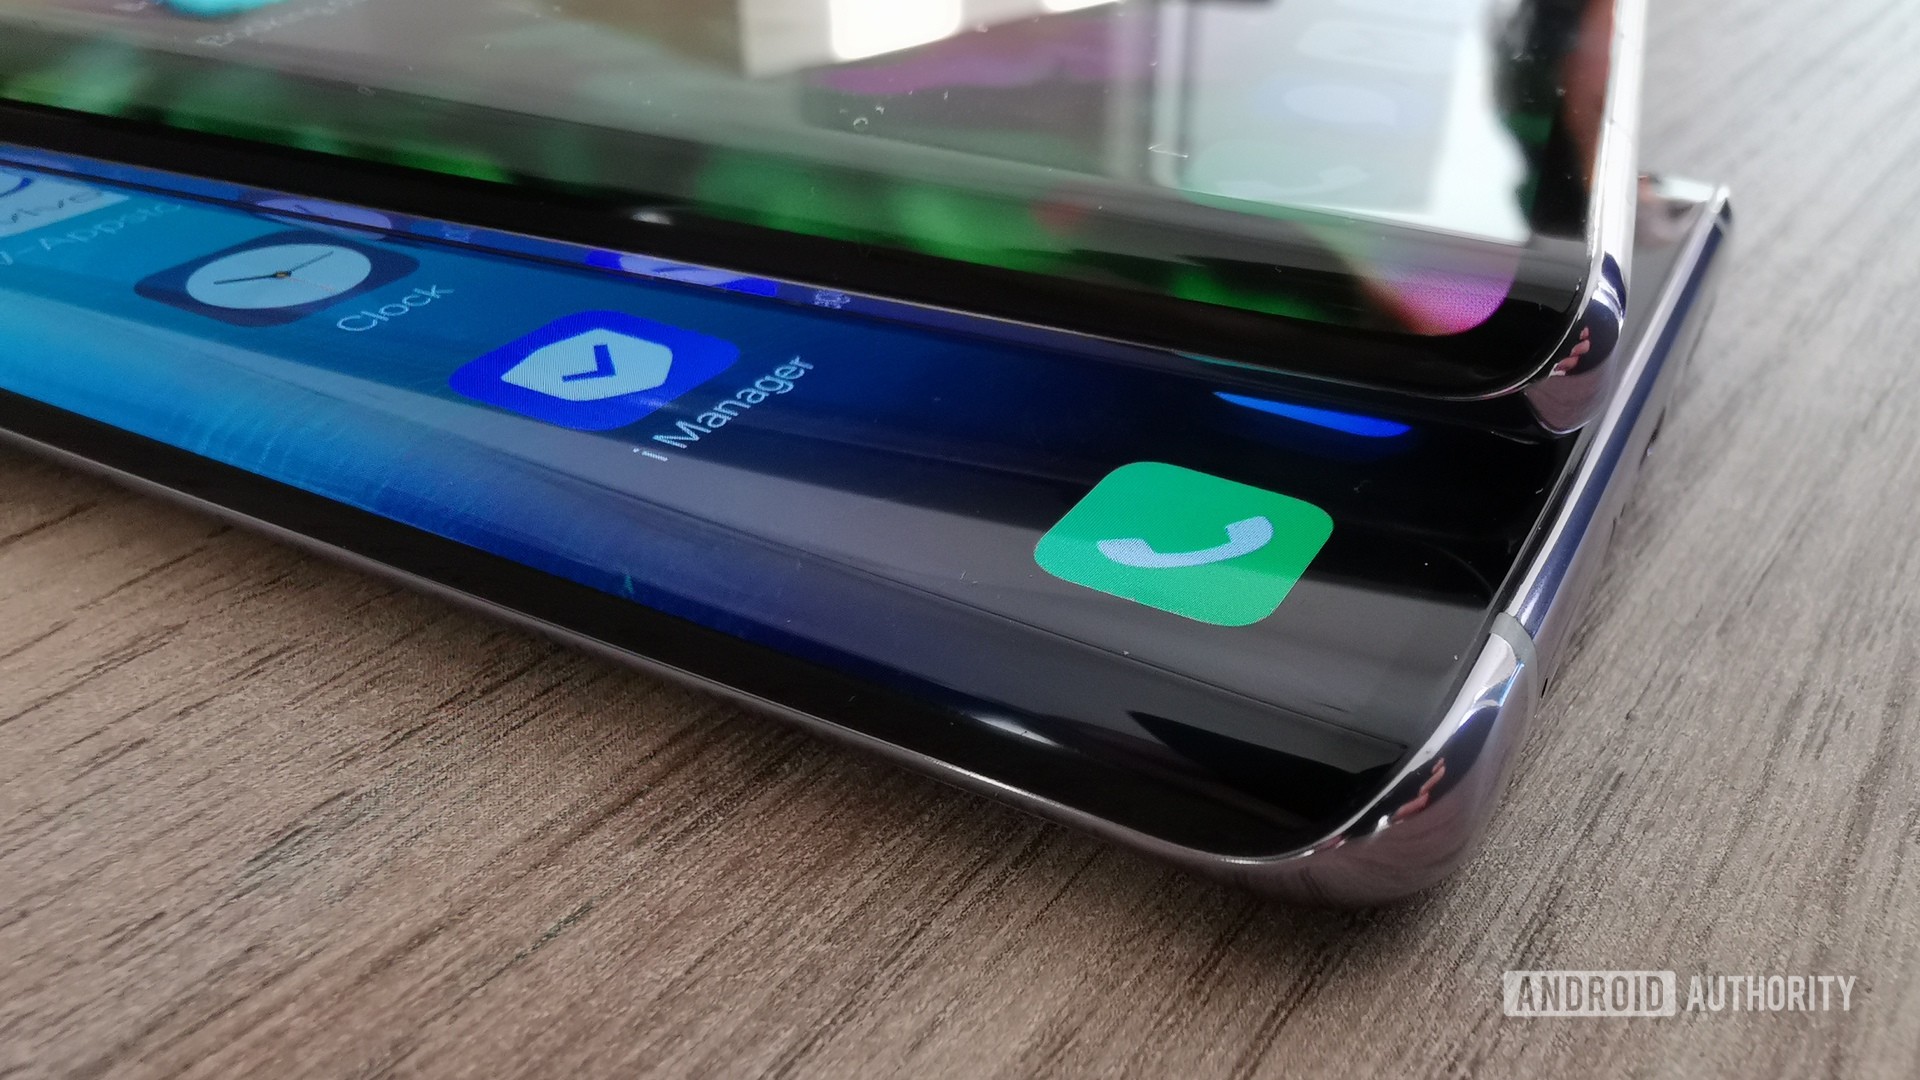 Xiaomi could be working on a phone with a waterfall display. But does it have an under-display or pop-up camera?